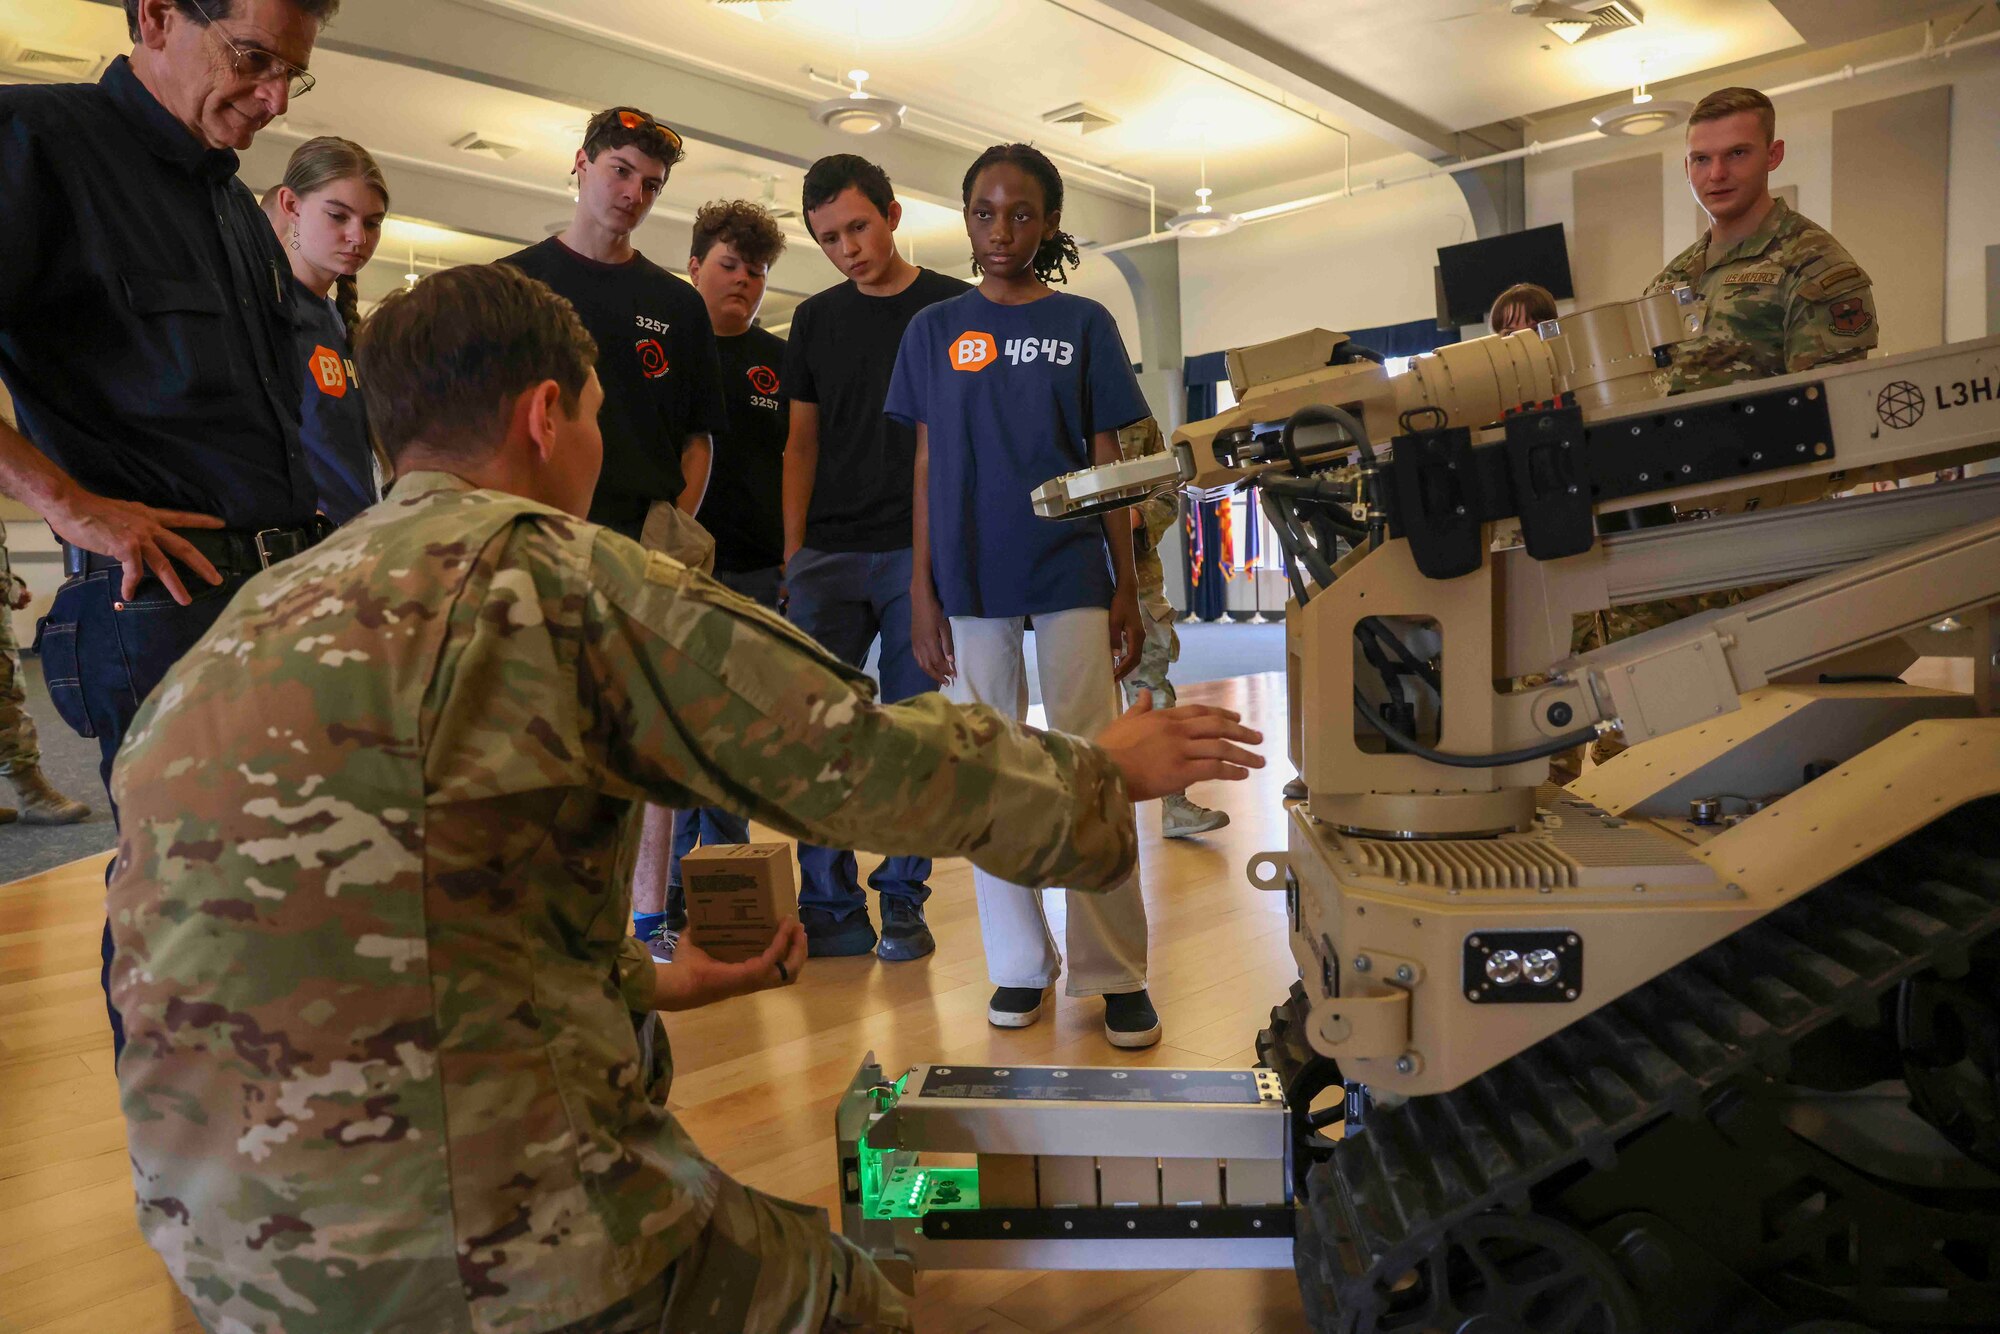 U.S. Air Force Staff Sgt. Hunter Rudnik, 9th Civil Engineer Squadron explosive ordnance technician, demonstrates the T-7 Explosive Ordnance Disposal robot to students with For Inspiration and Recognition of Science and Technology (FIRST), and its founder Dean Kamen during a base tour Aug. 3, 2023, at Beale Air Force Base, California.